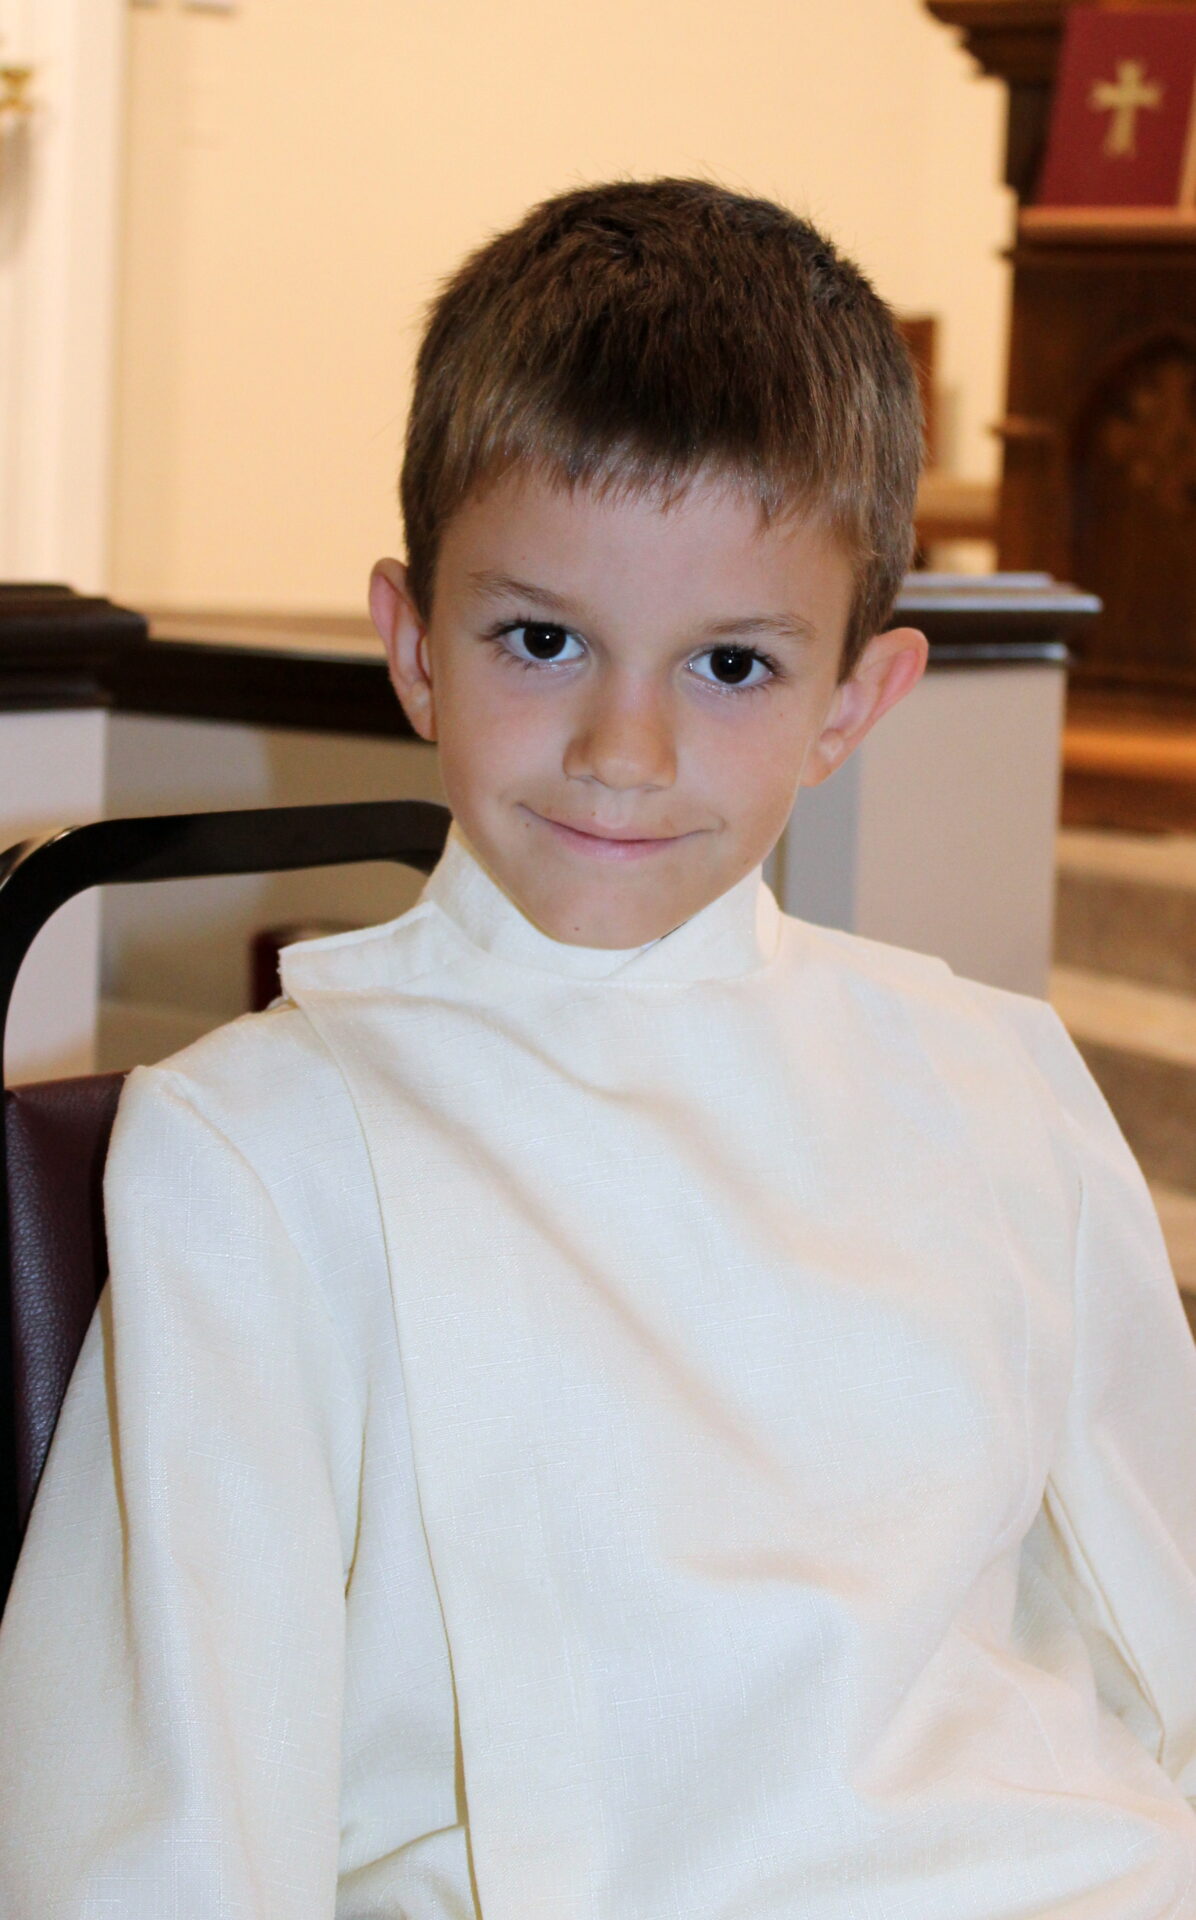 A young boy wearing a white sacristan uniform while sitting down on a brown metal chair